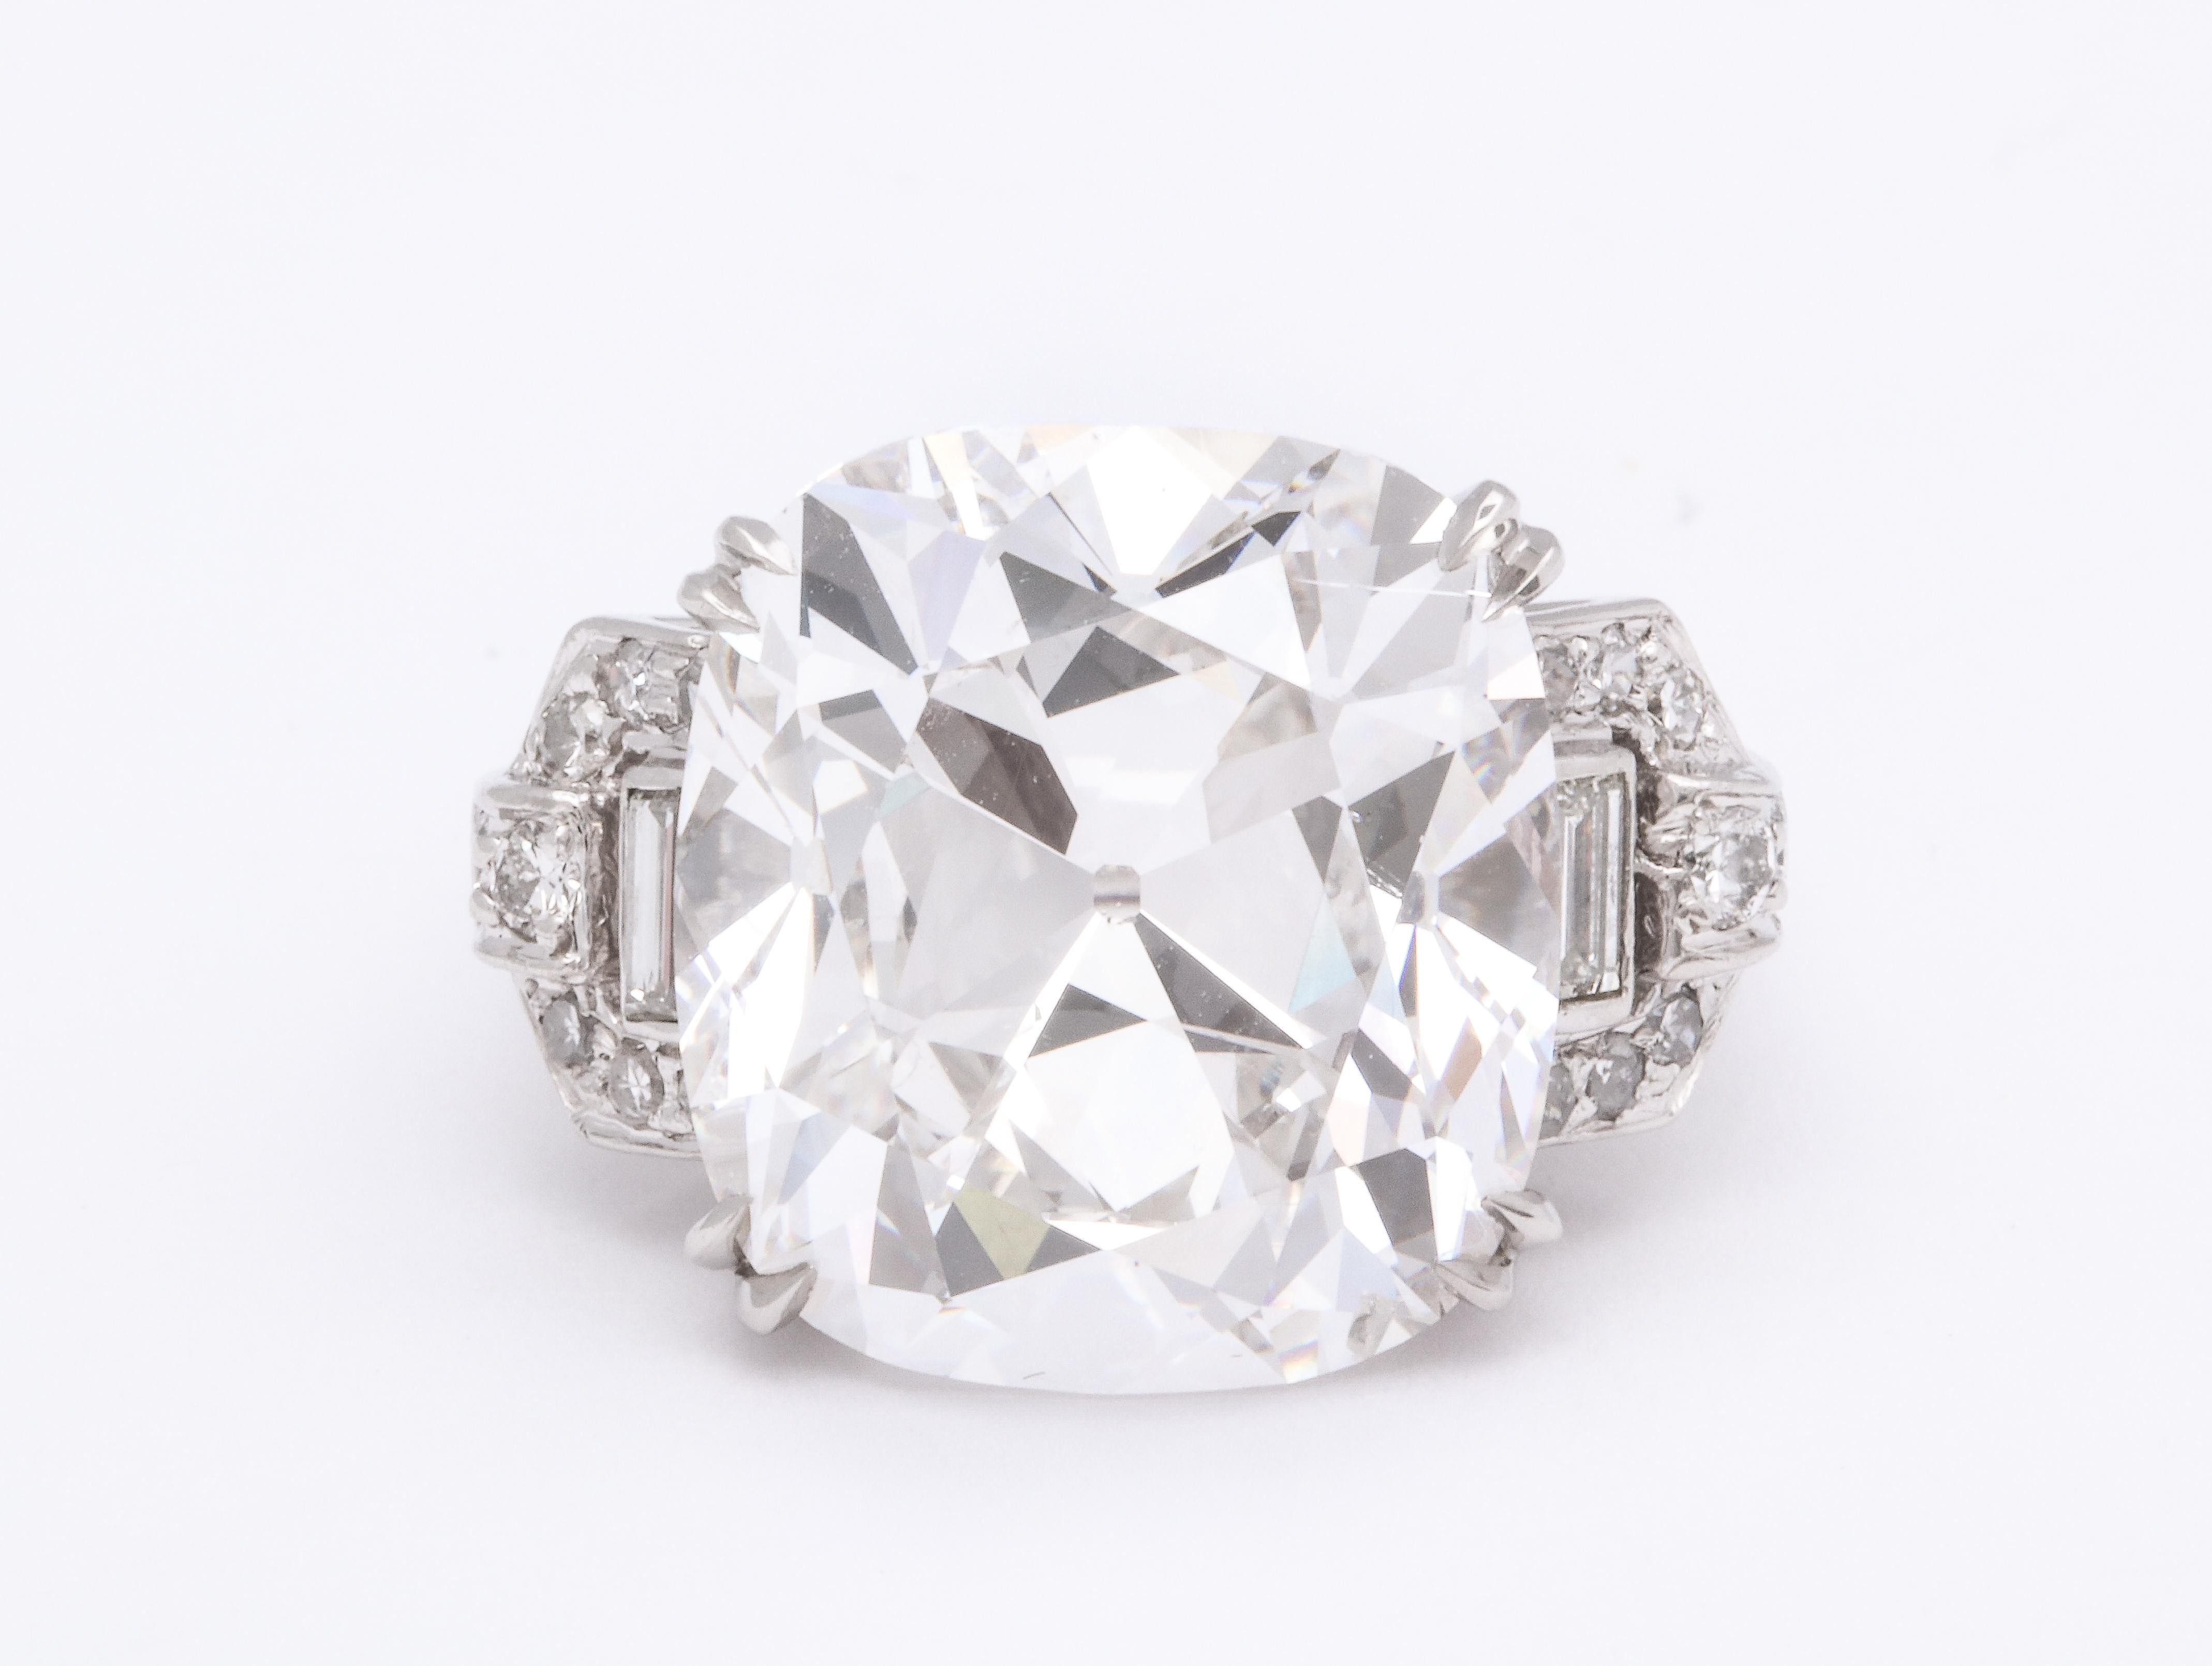 To say that old mine diamonds are much rarer than modern cut stones is already an understatement.  Now, consider the extreme rarity of a diamond weighing over 16 carats (16.23 carats to be exact).  Combine these two factors and you have the present